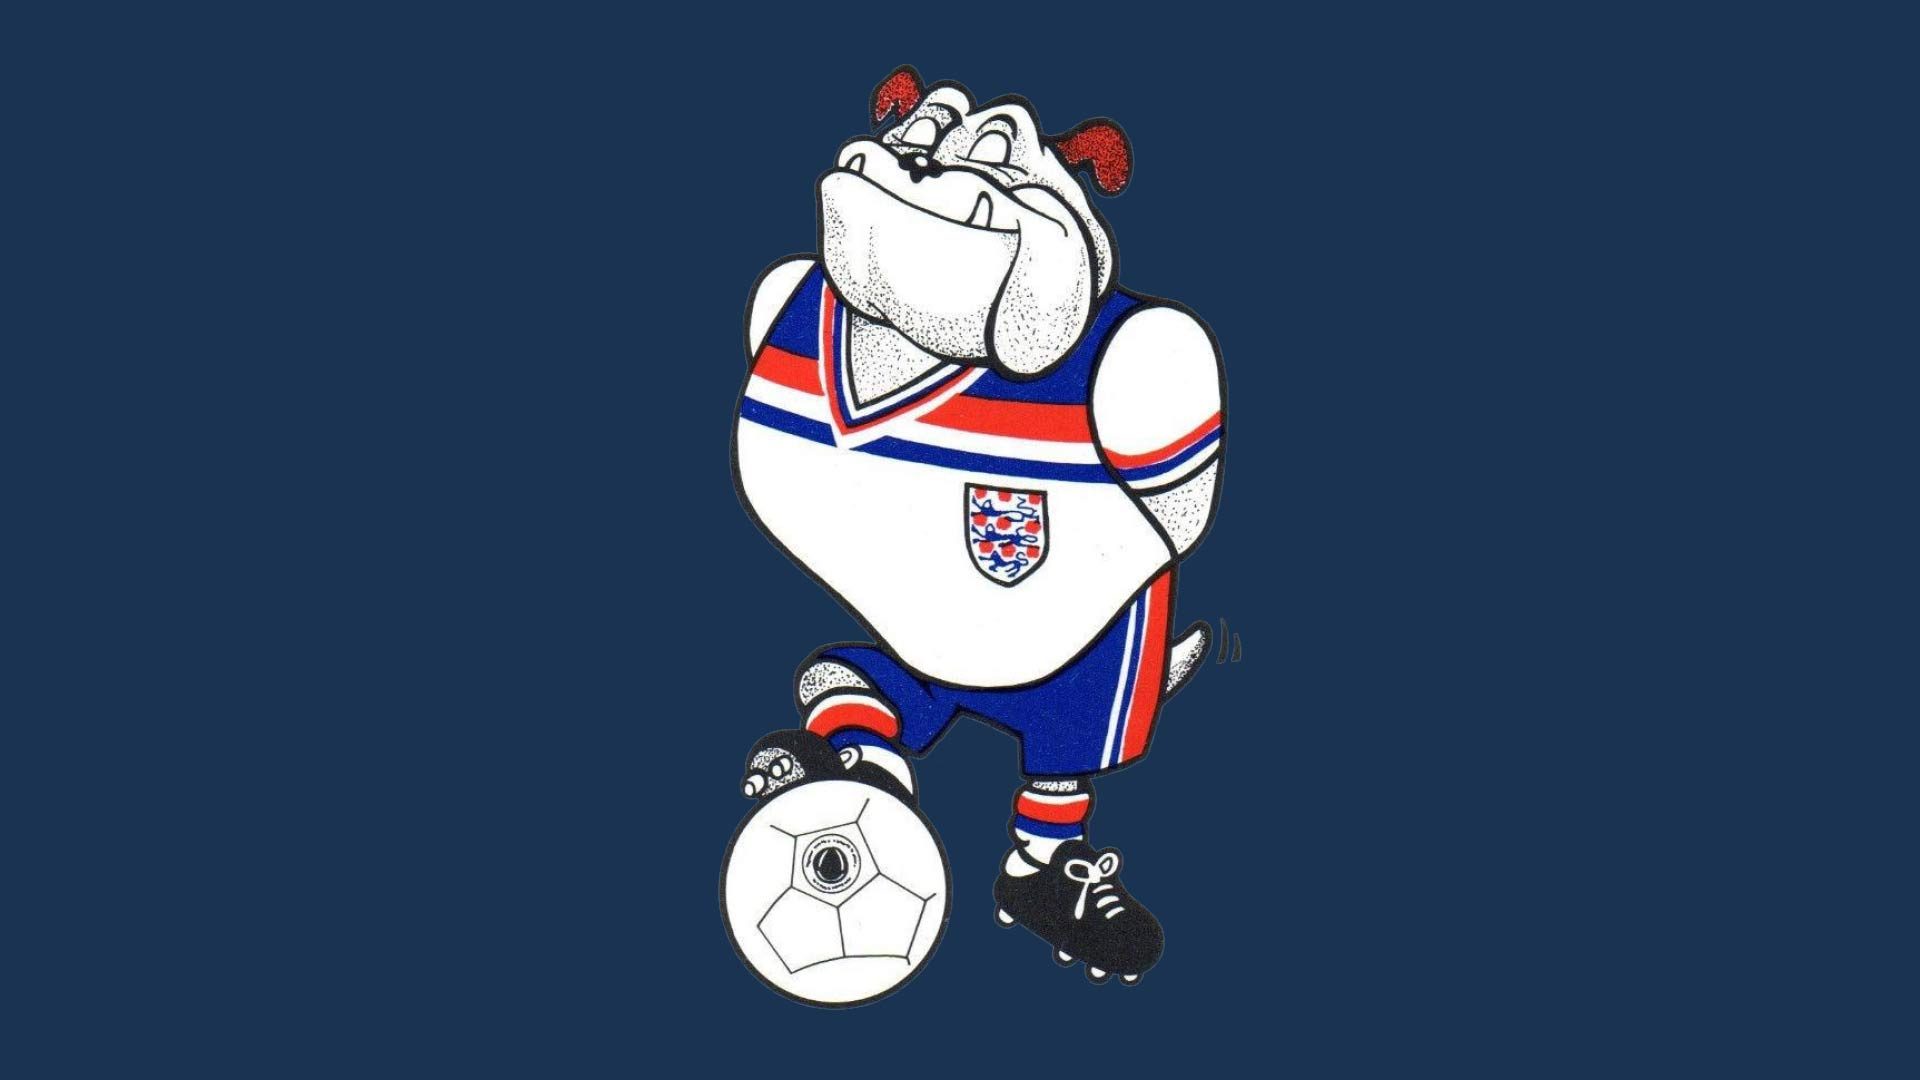 A cartoon bulldog in England's 1982 World Cup kit standing with his foot on the ball looking quite smug — AKA Bulldog Bobby